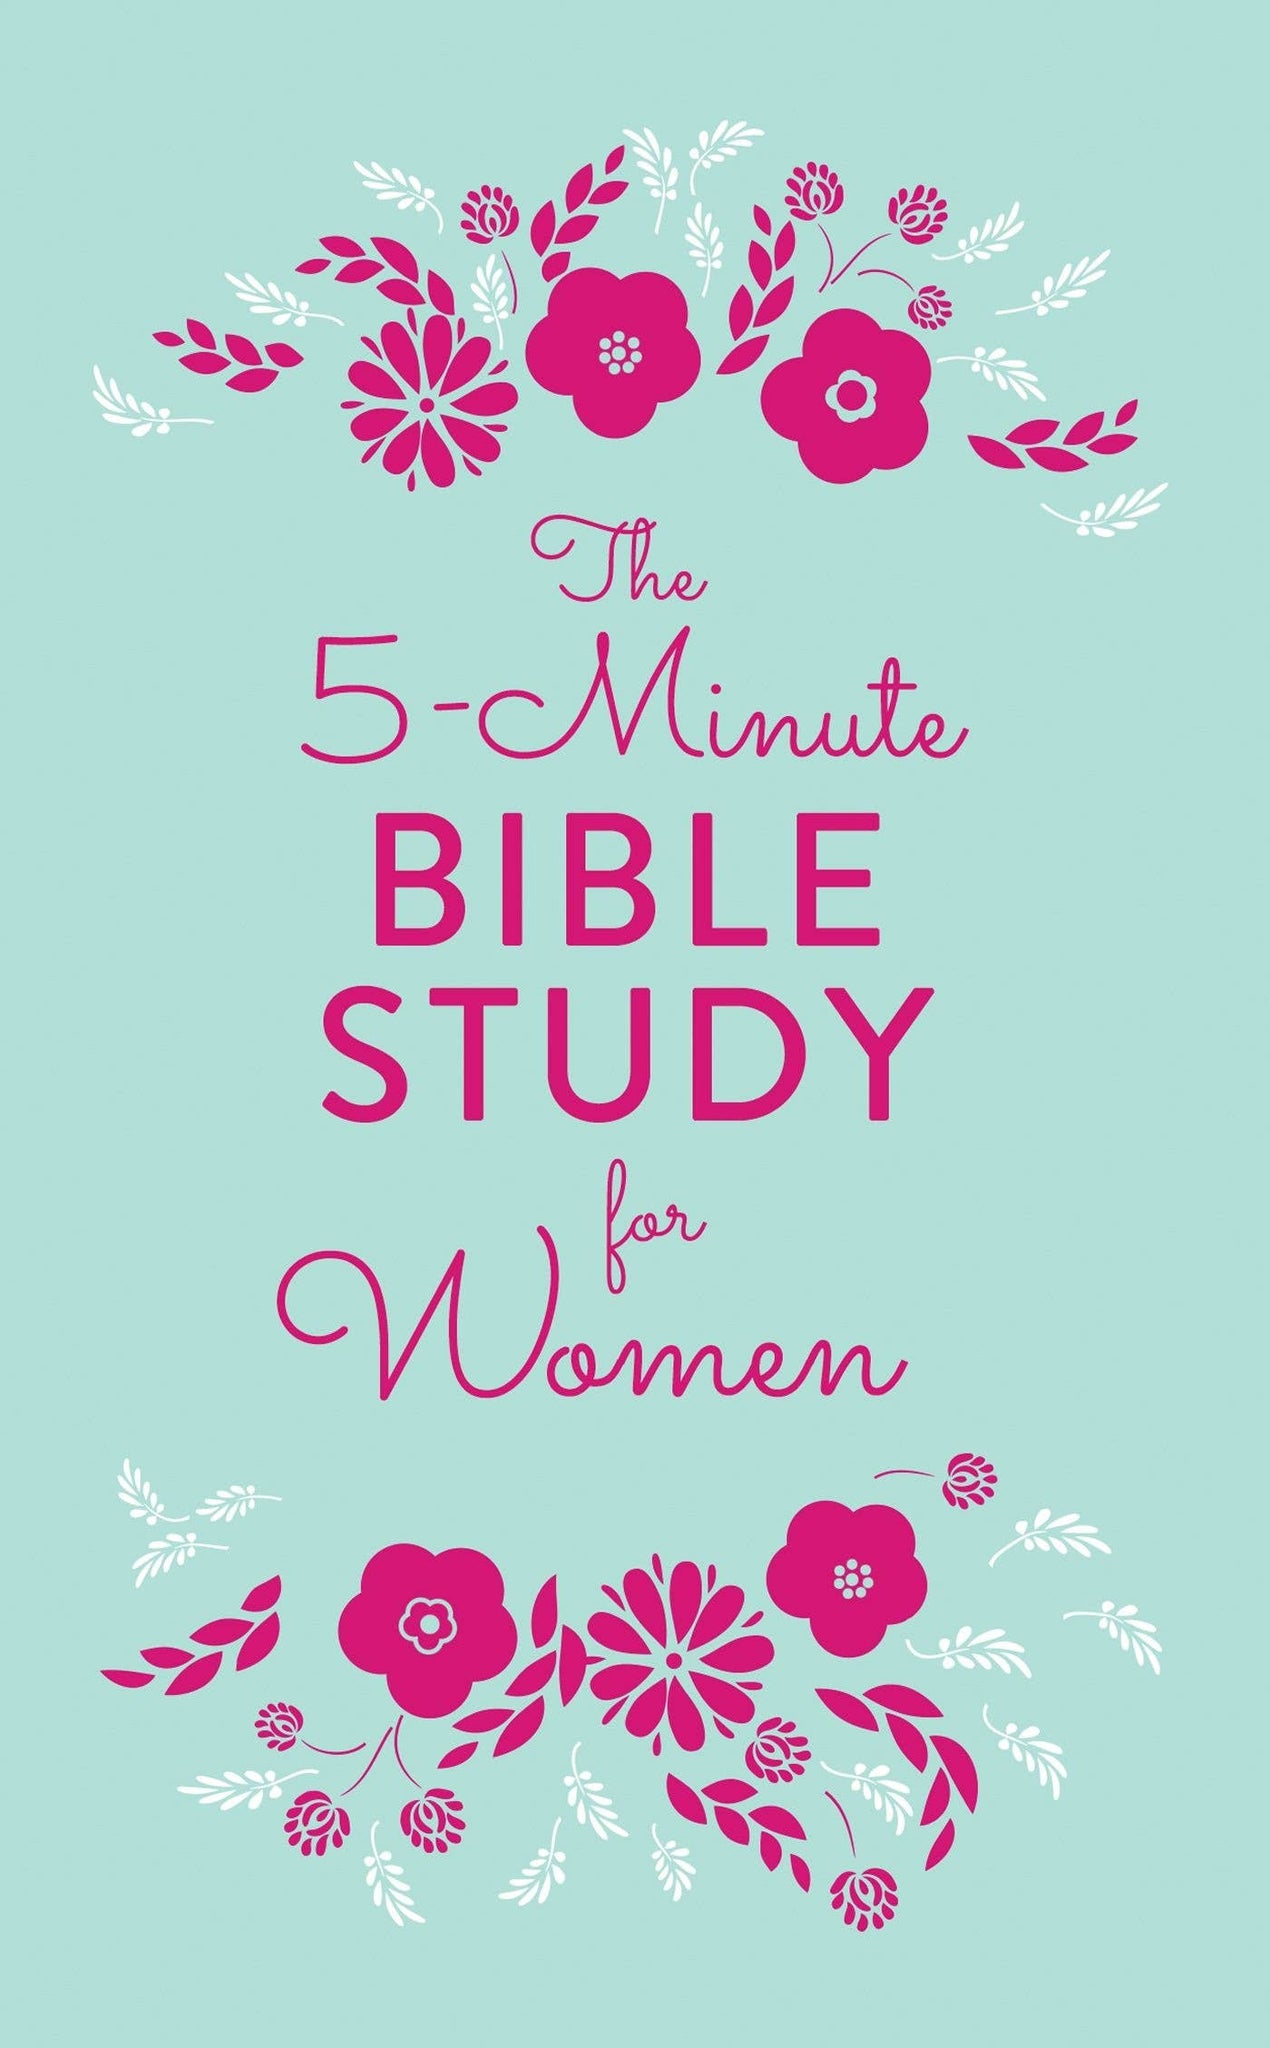 The 5-Minute Bible Study For Women